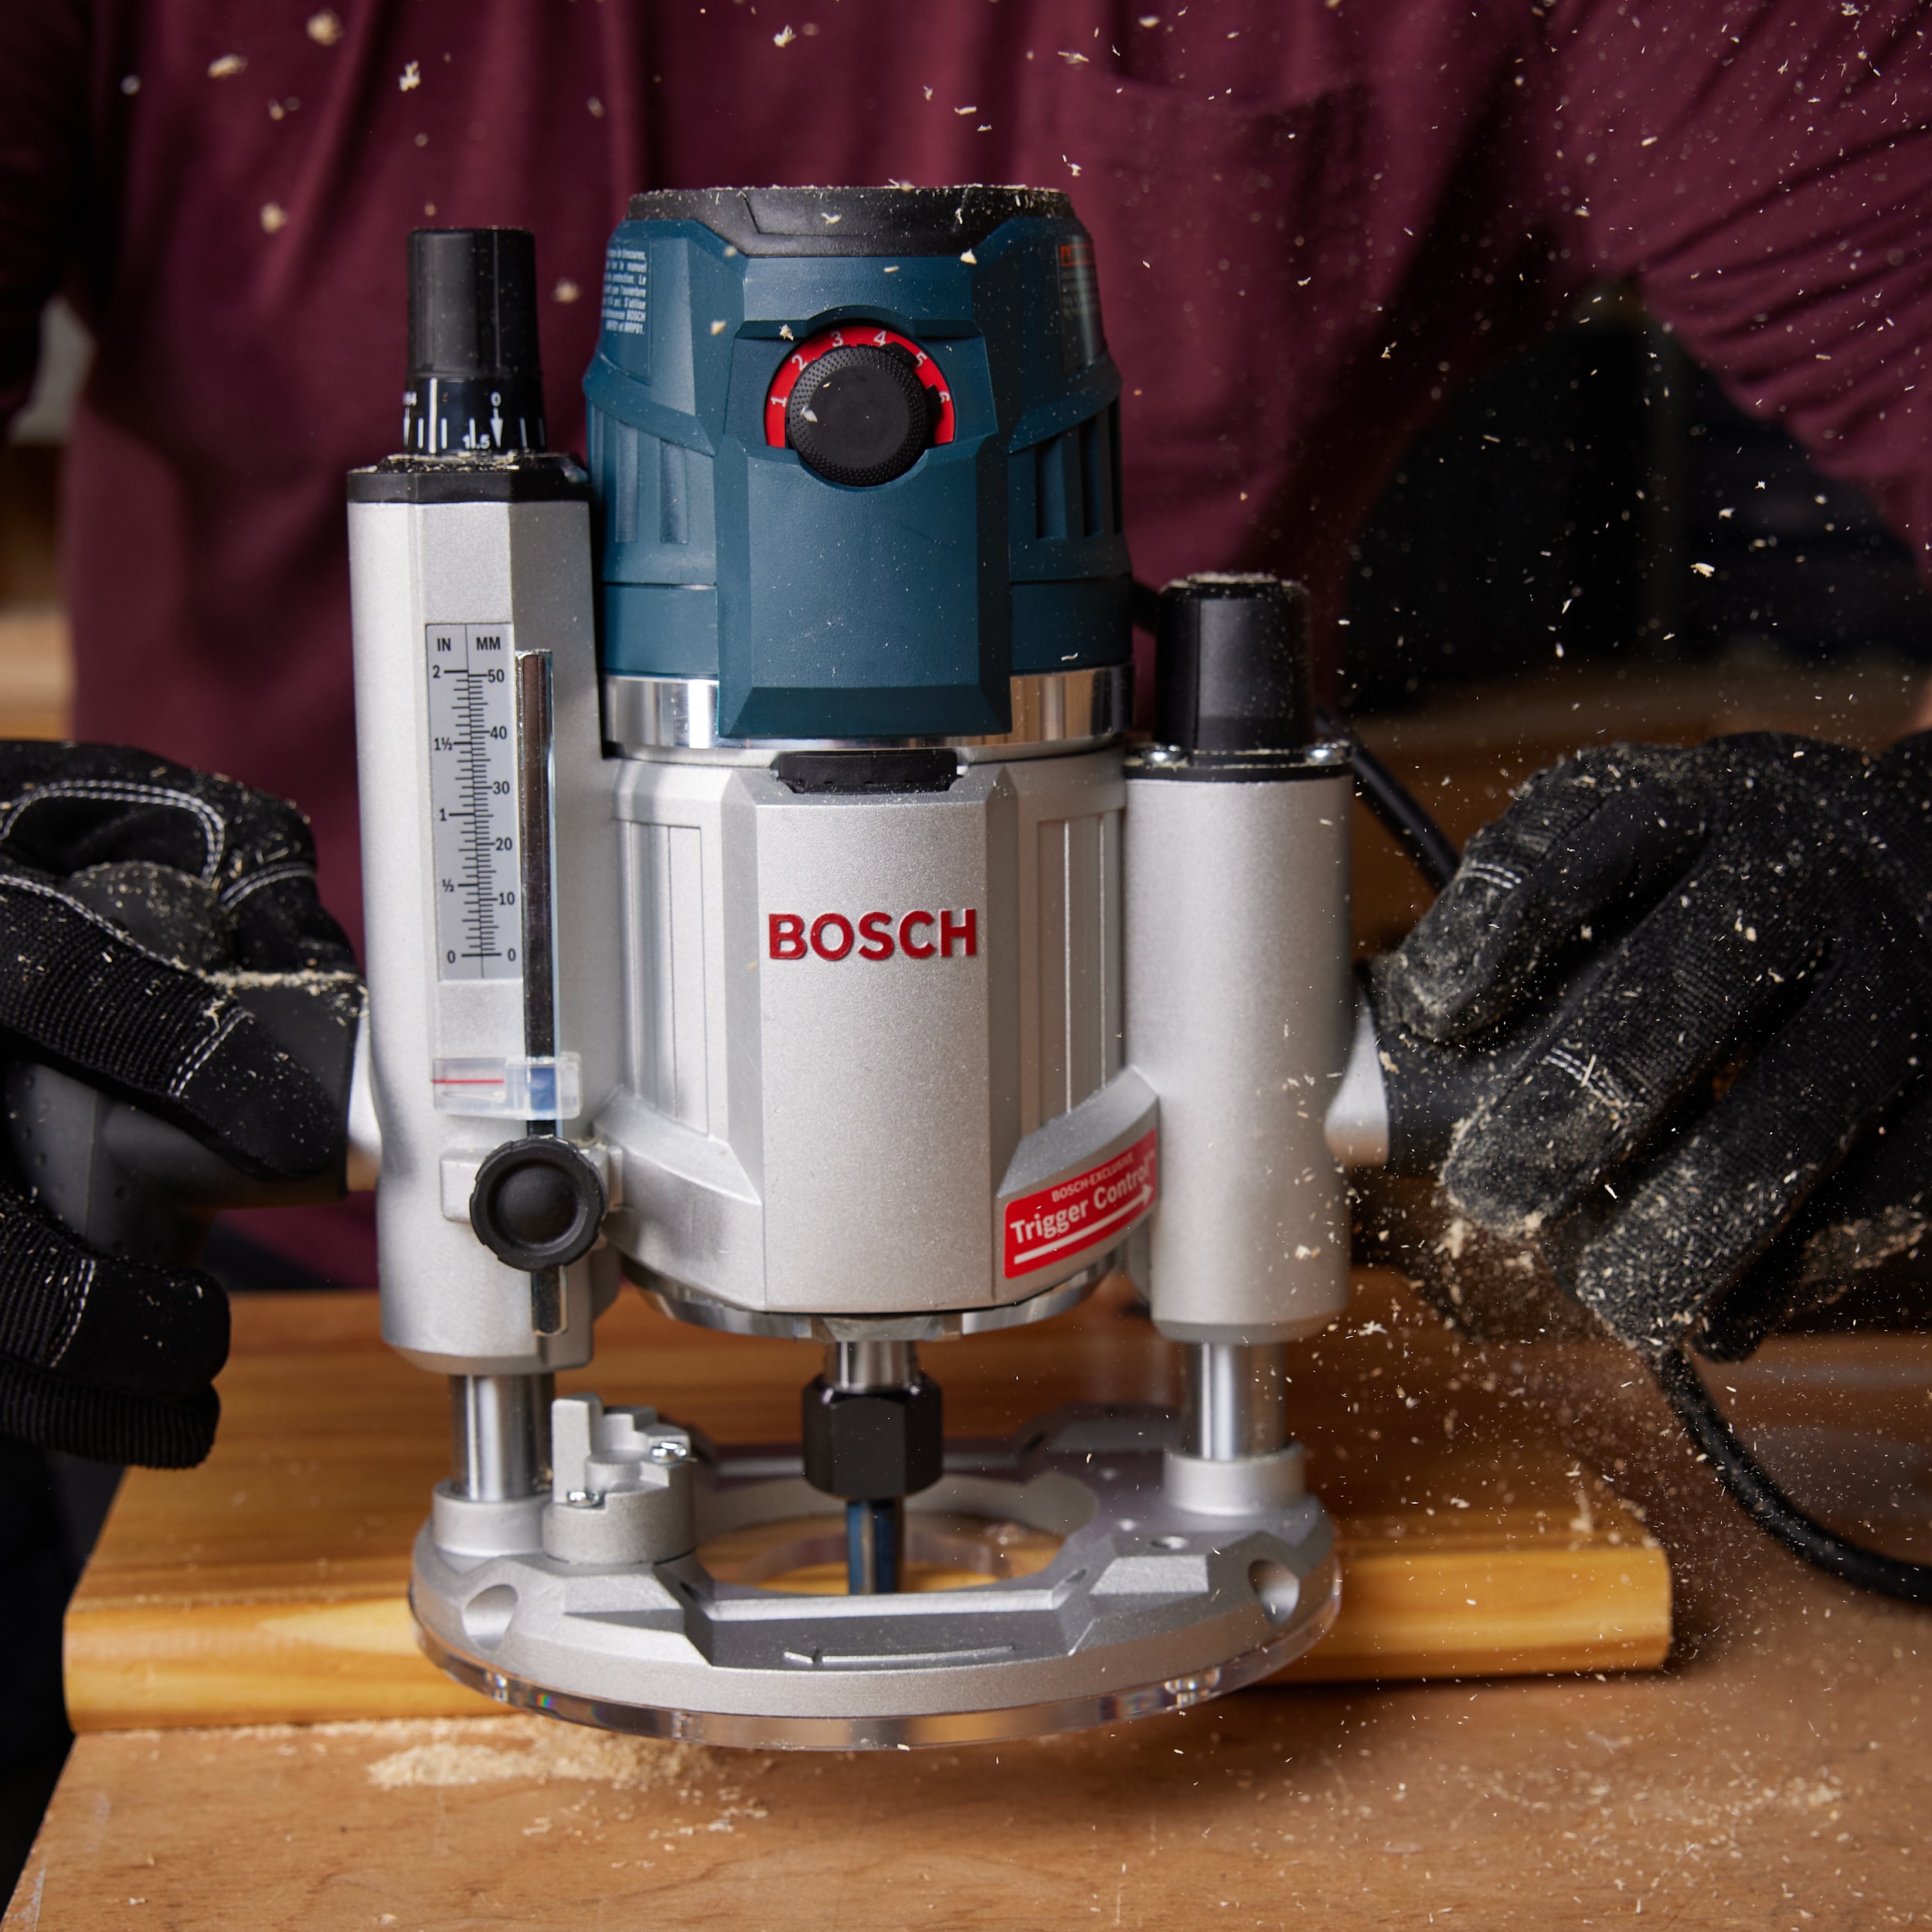 Bosch - 2.25 HP Combination Plunge- and Fixed-Base Router - Model: 161 –  Professional Grinding Inc